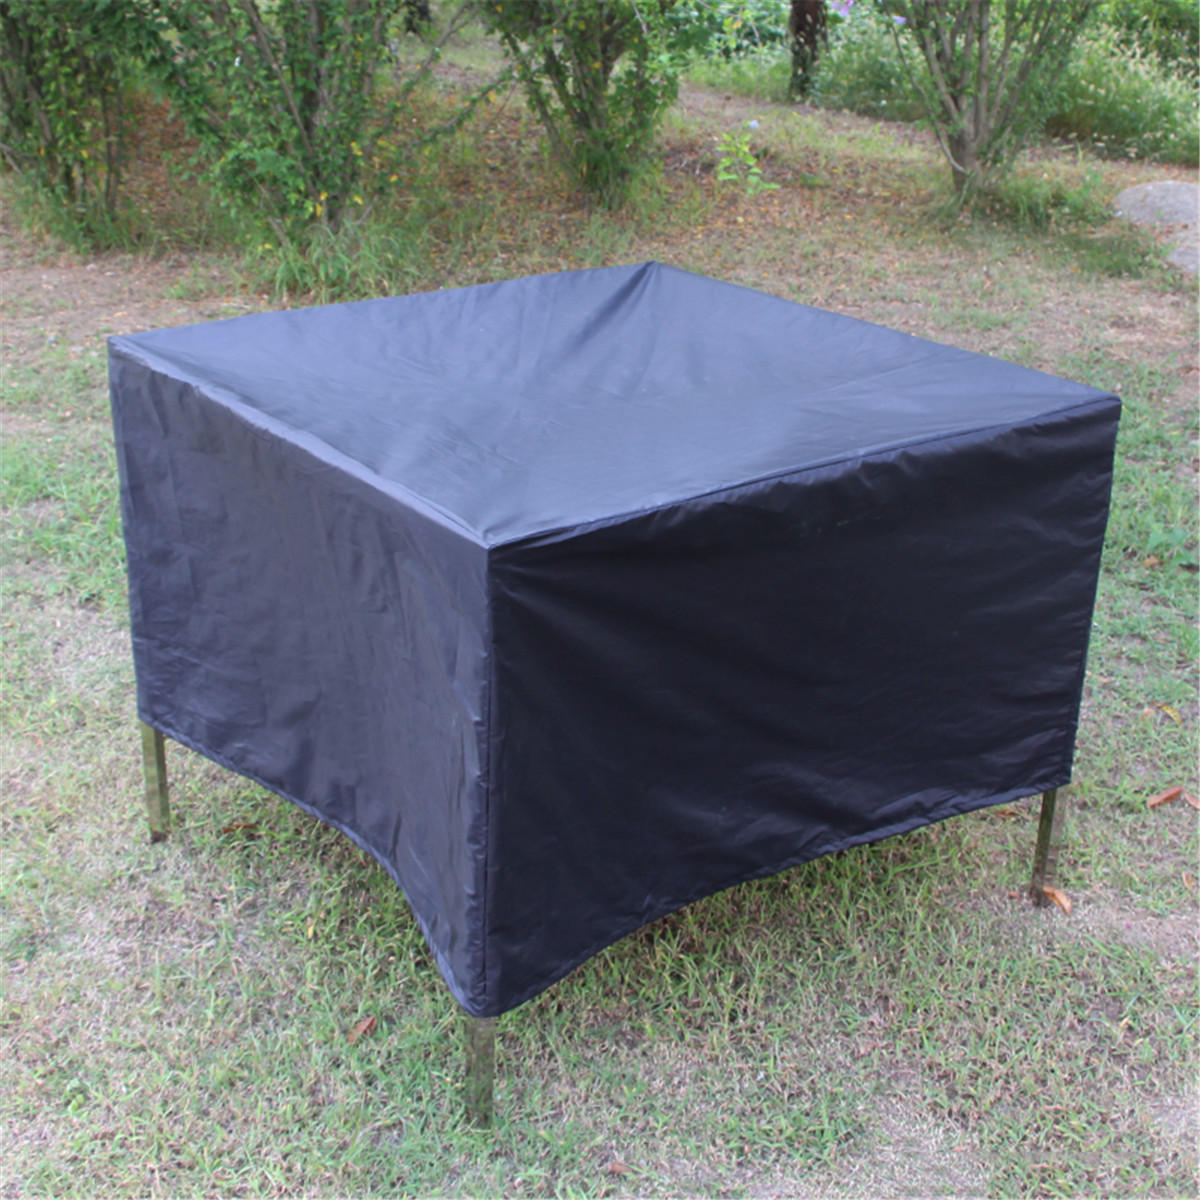 160x160x84cm Outdoor Garden Patio Waterproof Cube Table Furniture Cover Shelter Protection